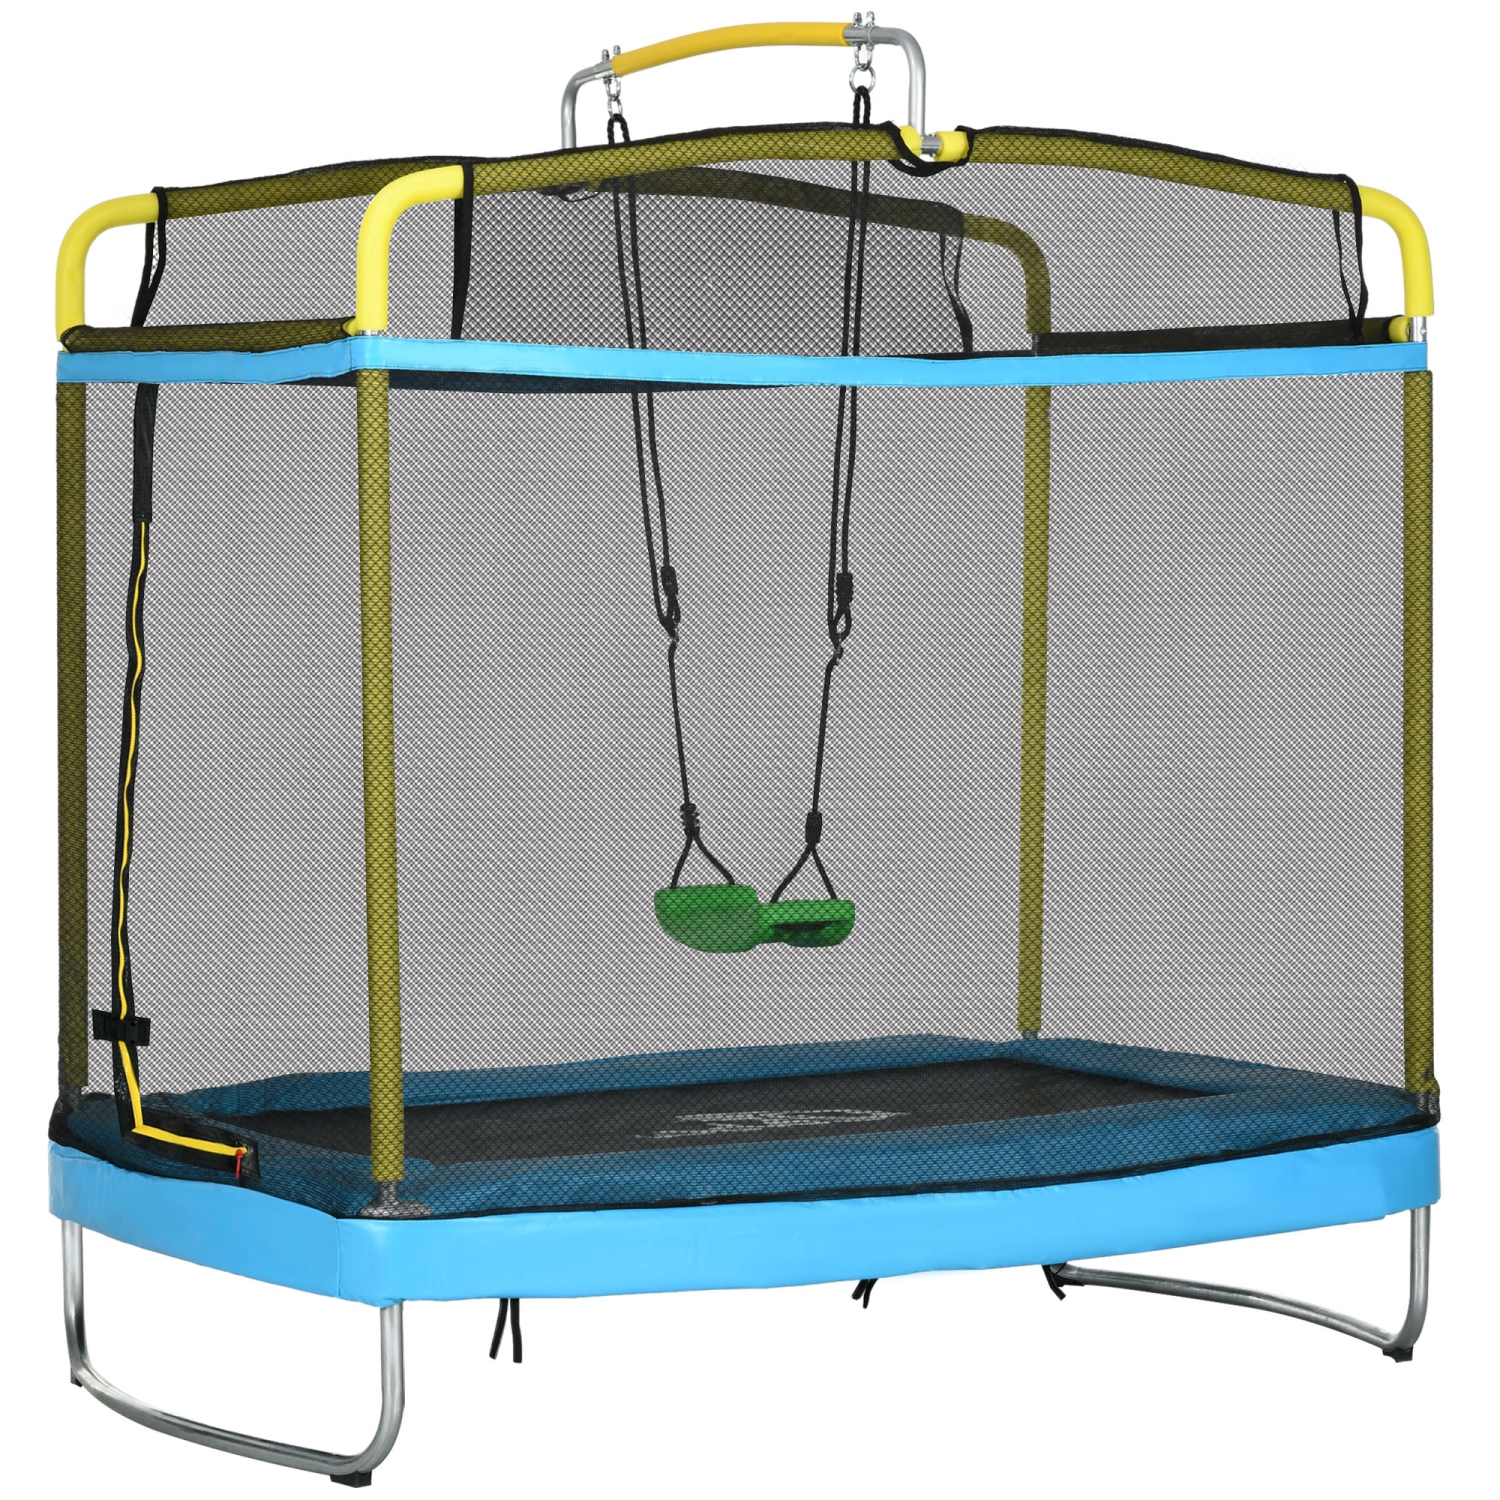 Qaba 6.9FT Trampoline for Kids, 3 In 1 Mini Trampoline with Safety Net, Gymnastics Bar, Swing, Toddler Trampoline for Baby 3+ Years Old Indoor/Outdoor Use, Light Blue